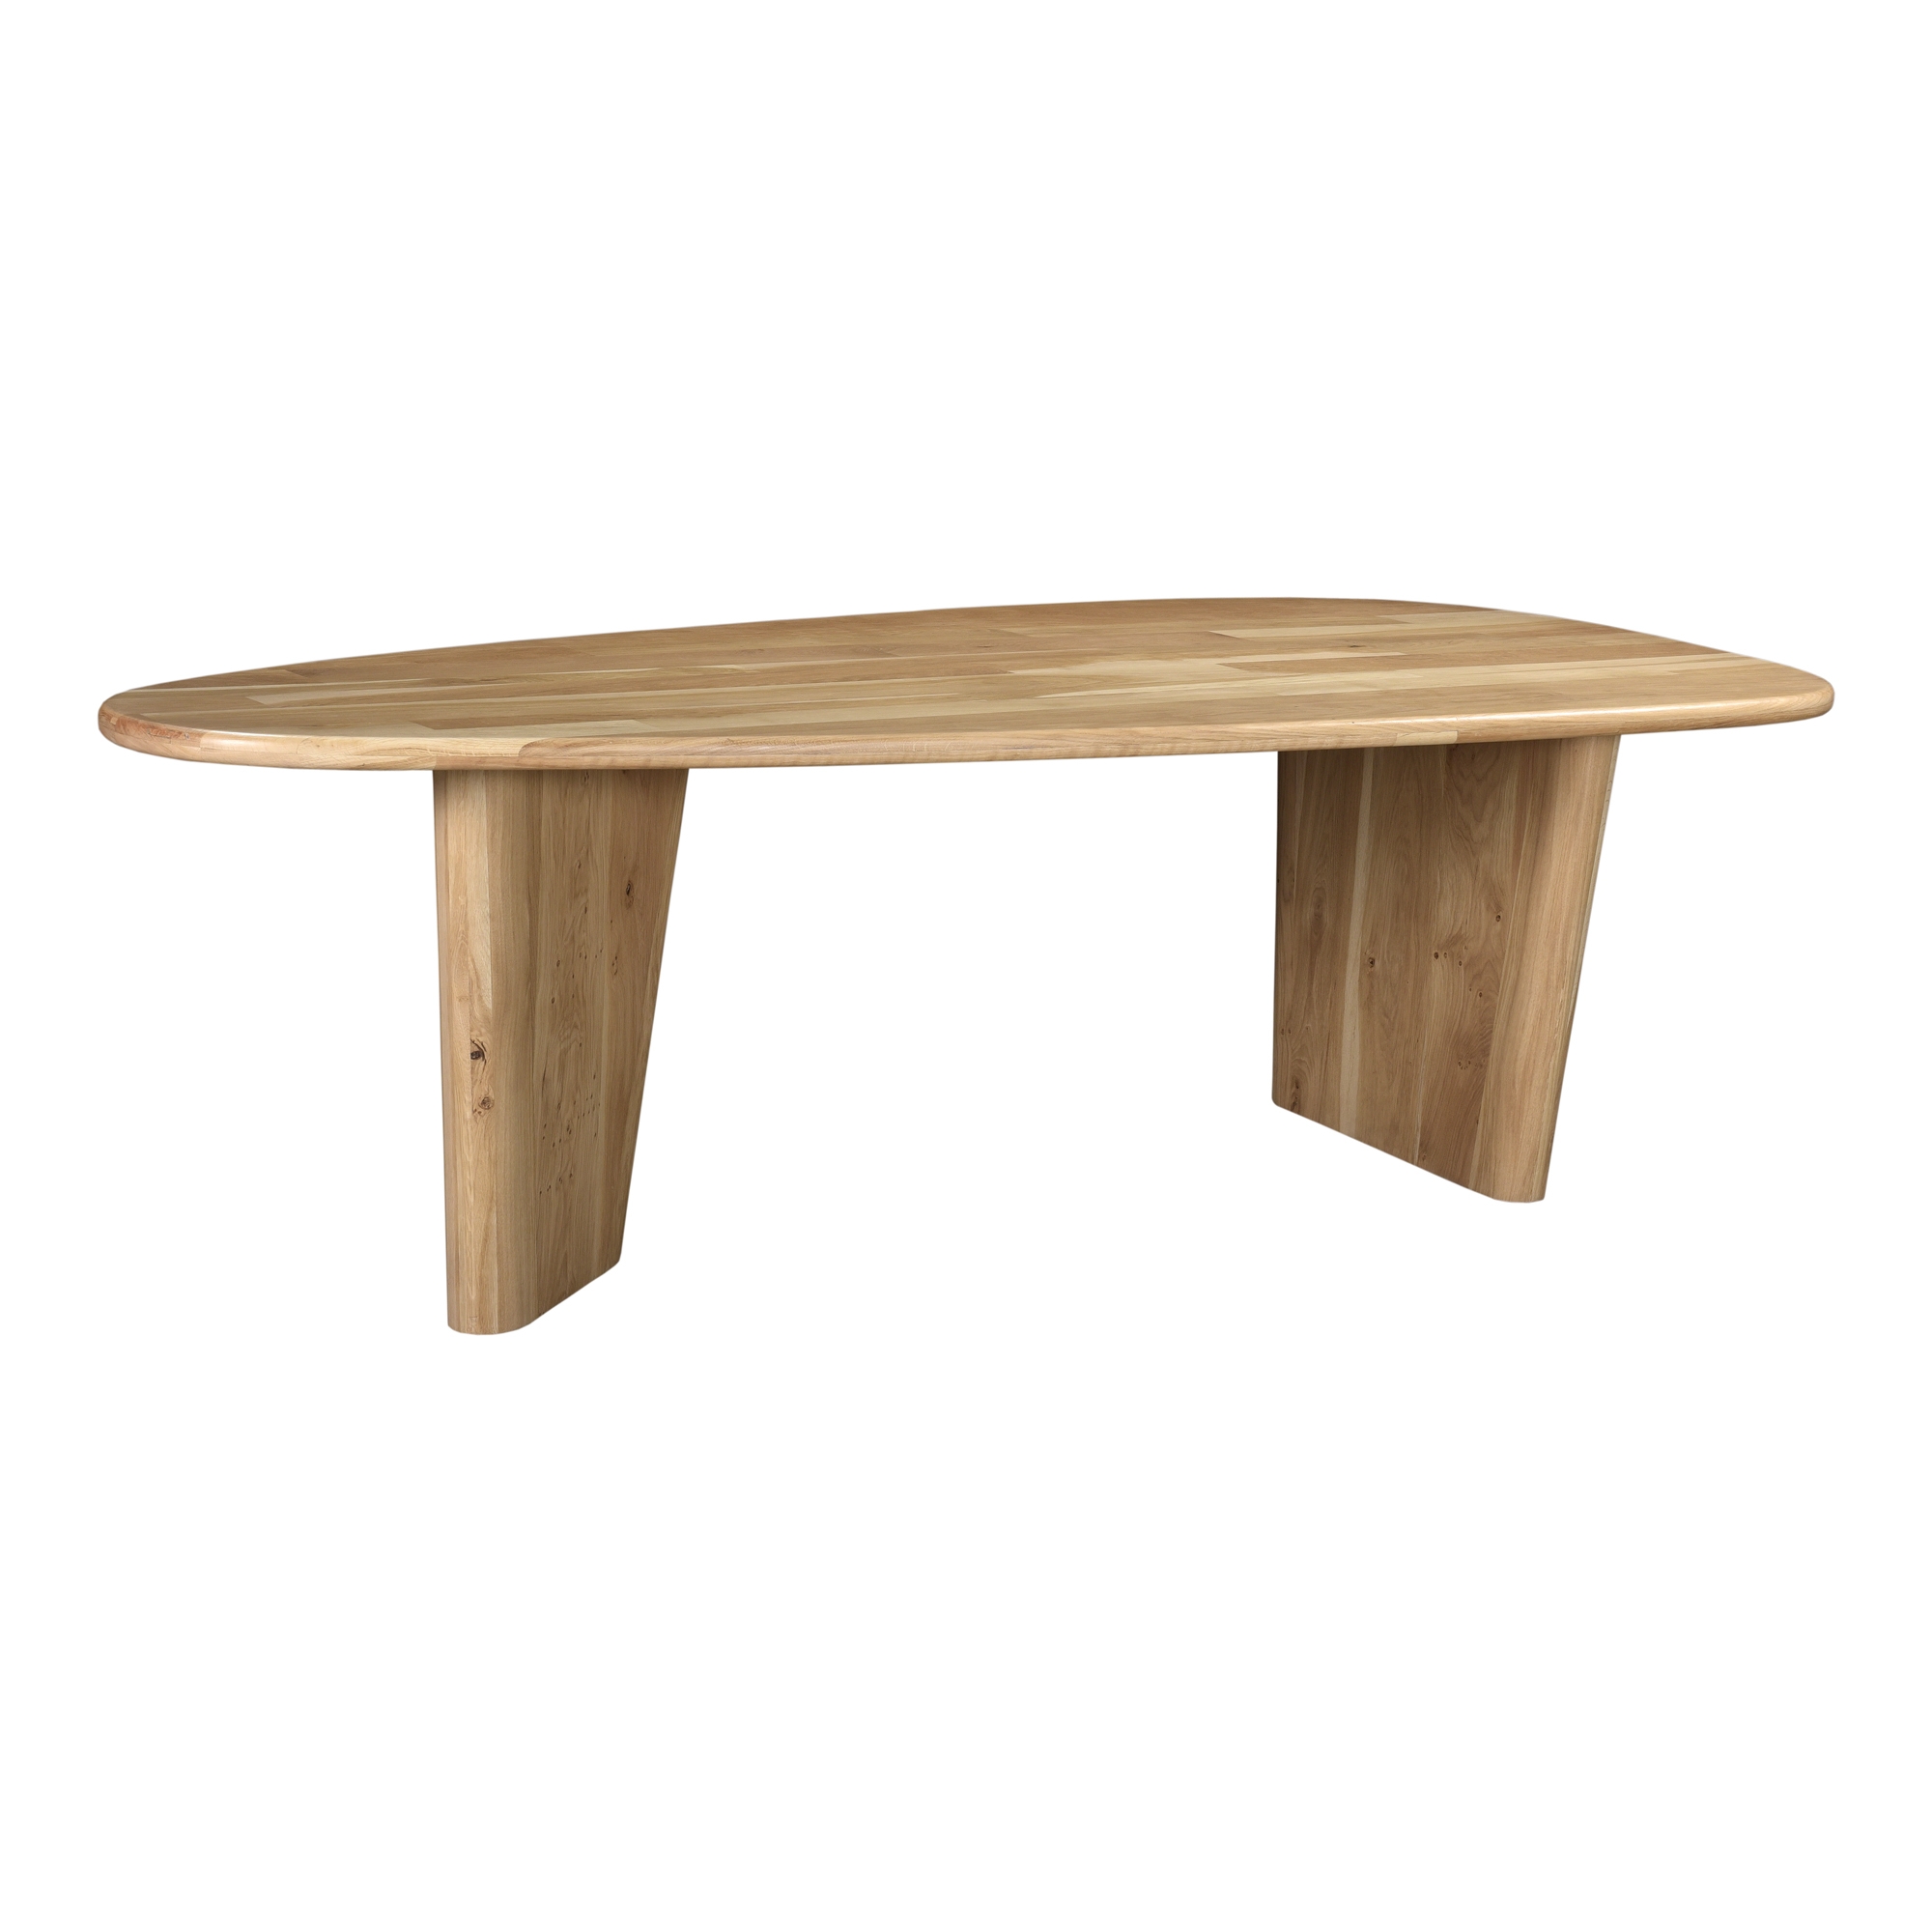 Appro Dining Table - Image 1